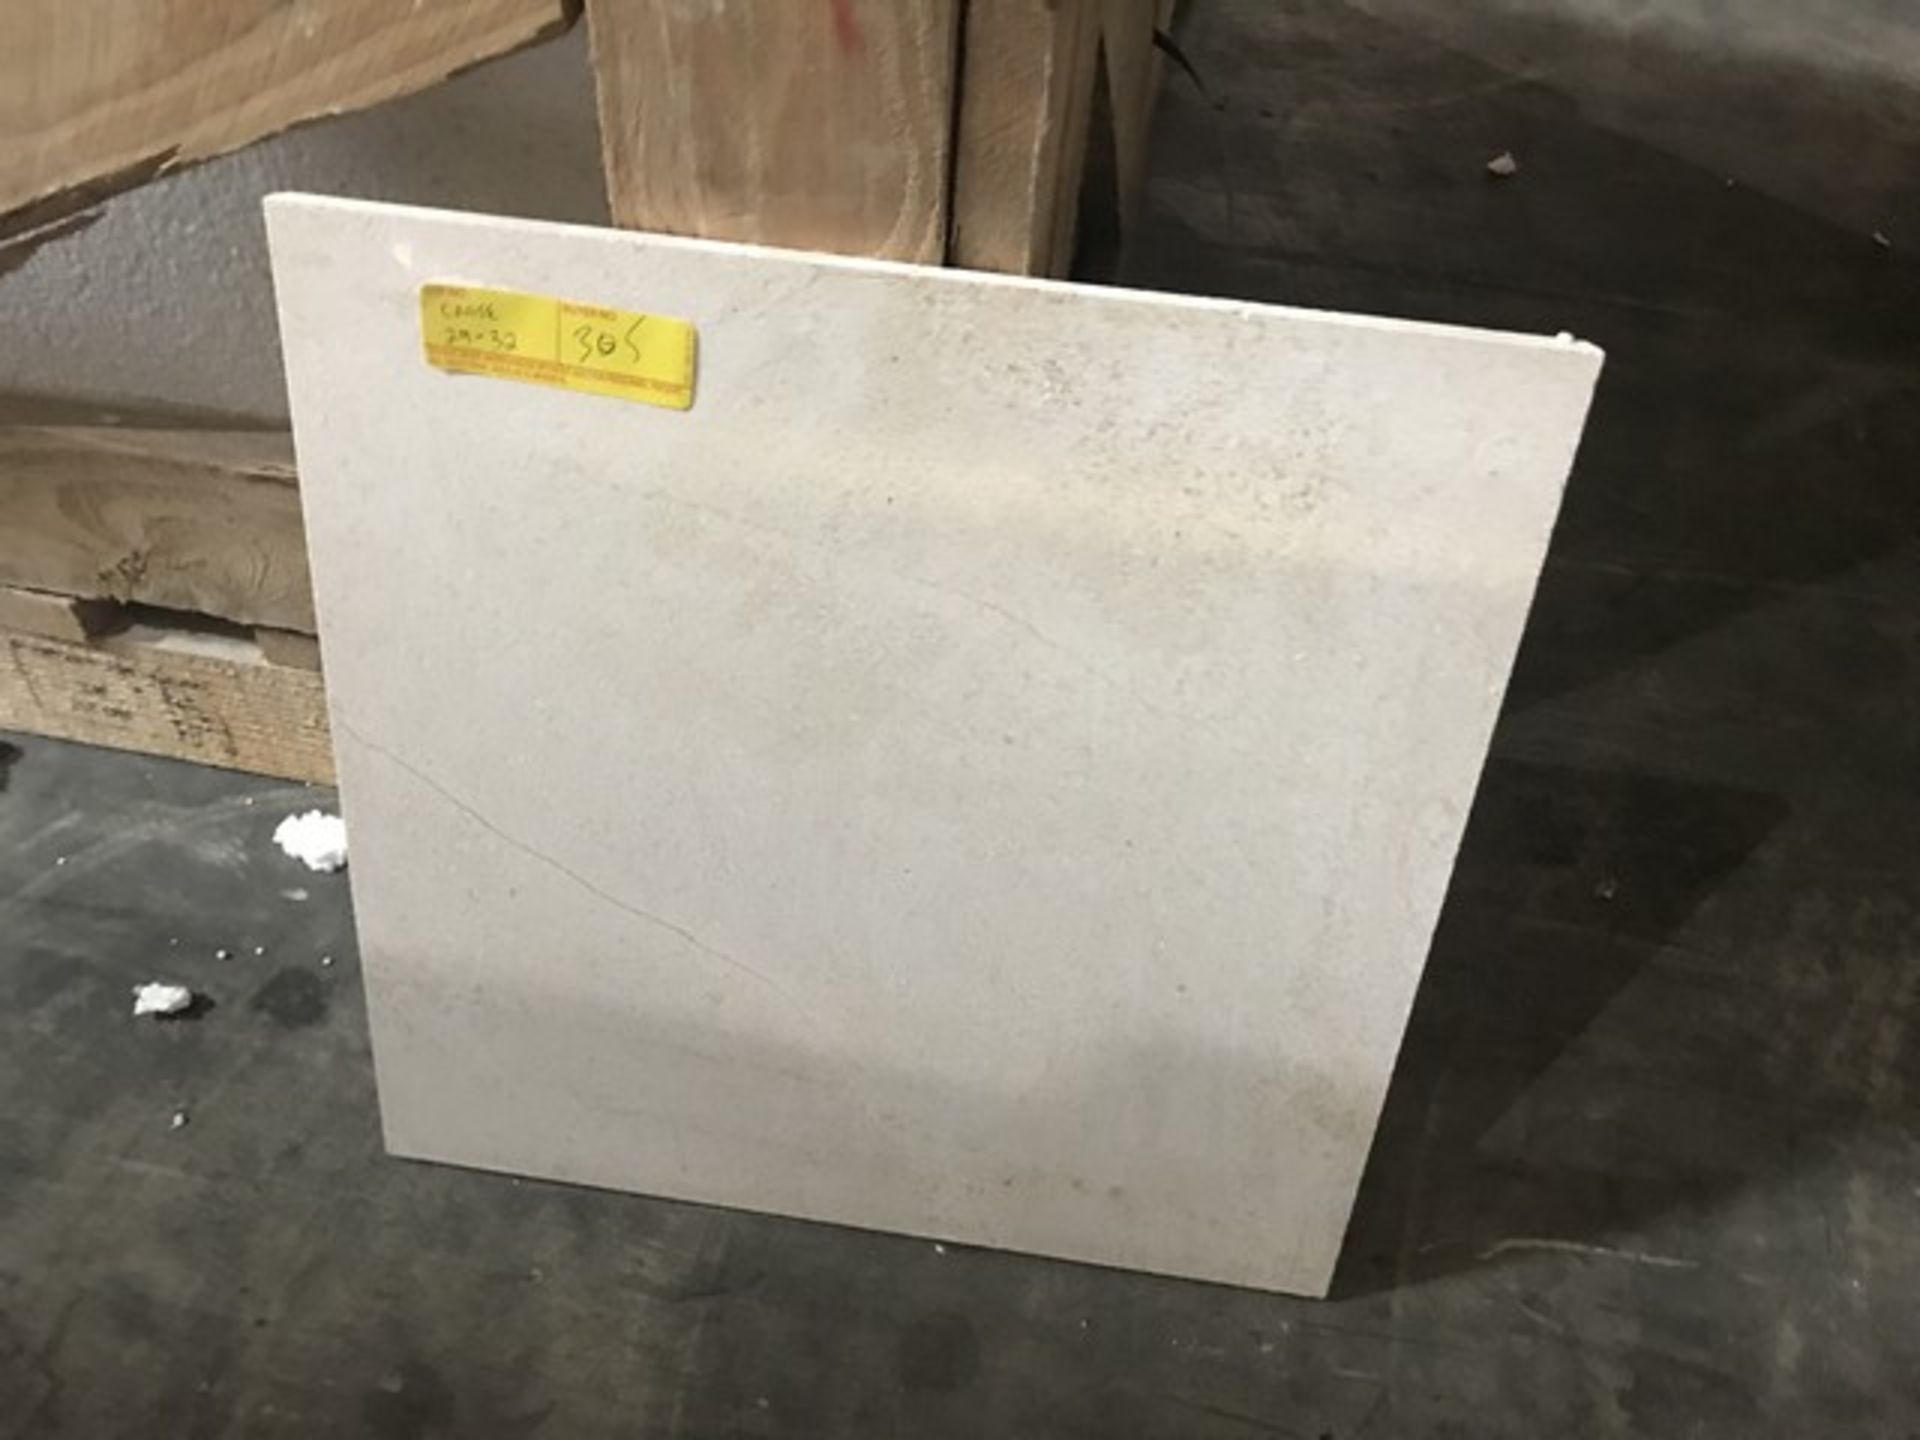 SQ.FT. - POLISHED CROSS CUT MARBLE - 16'' x 16'' x 7/16'' - 160 PIECES / 284.8 SQ.FT. (CRATE #32)